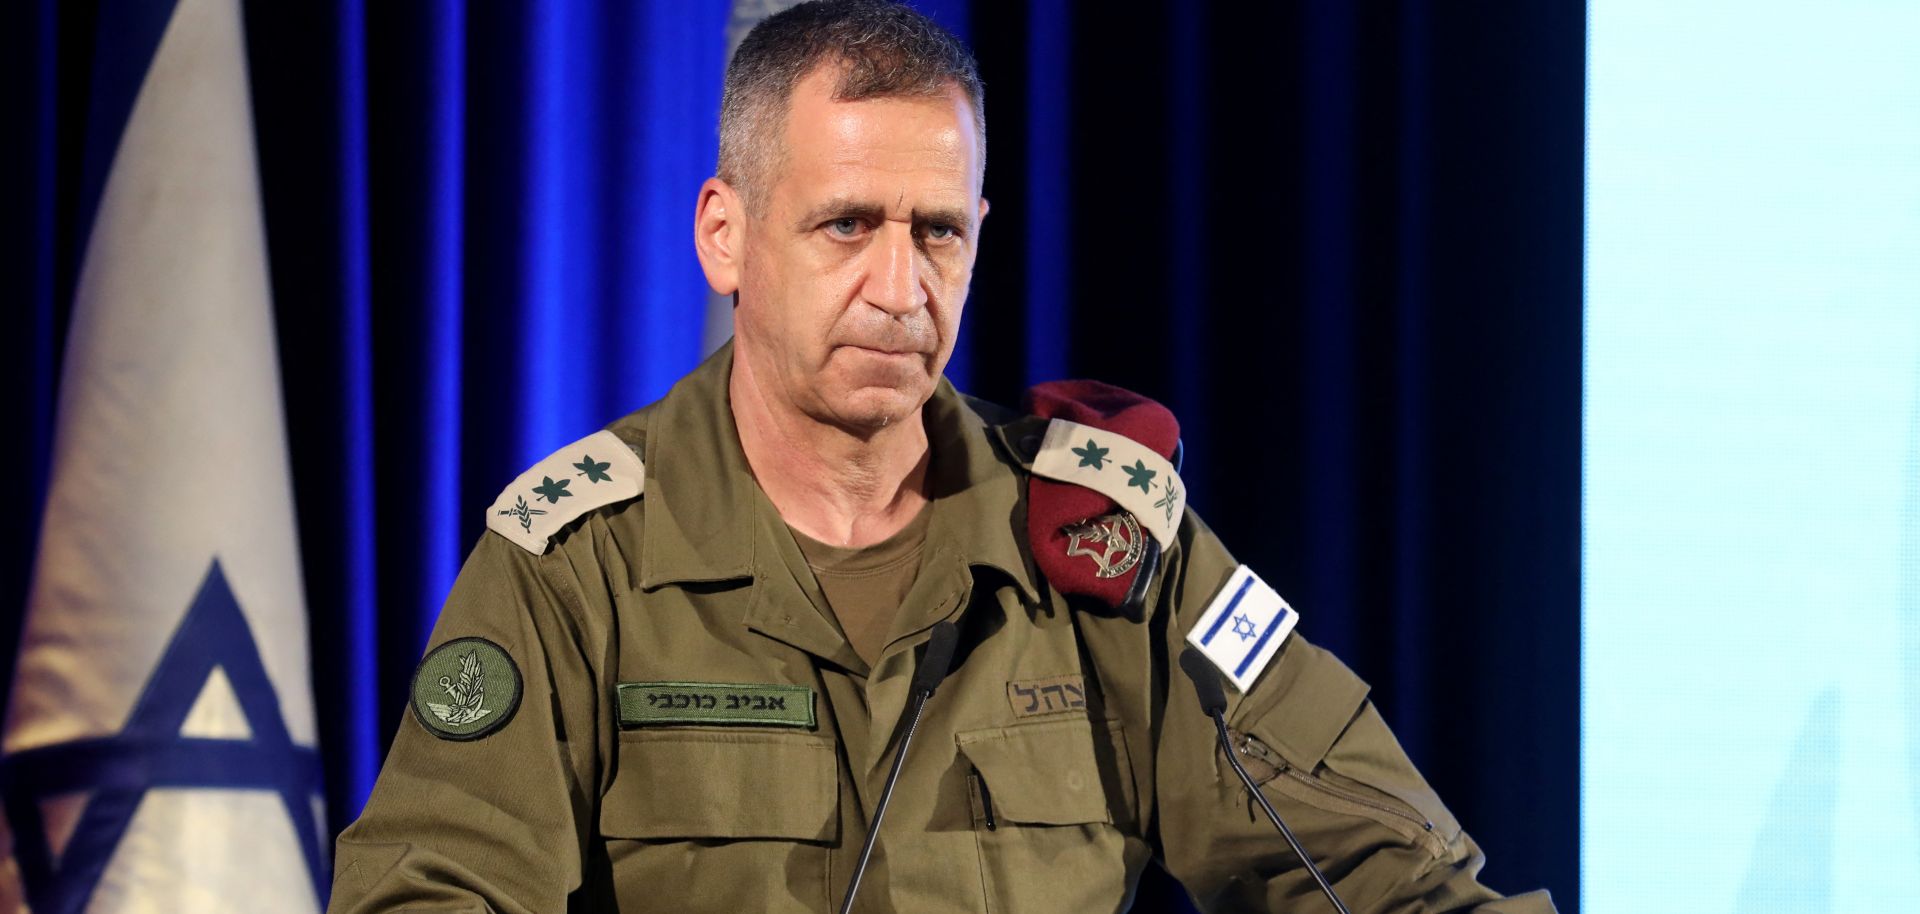 Israeli Defense Forces Chief of Staff Aviv Kochavi is seen in Jerusalem on Nov. 29, 2021, after Israeli Prime Minister Bennett said Iran was re-entering talks on its nuclear program to seek sanctions relief in exchange for ''almost nothing.''